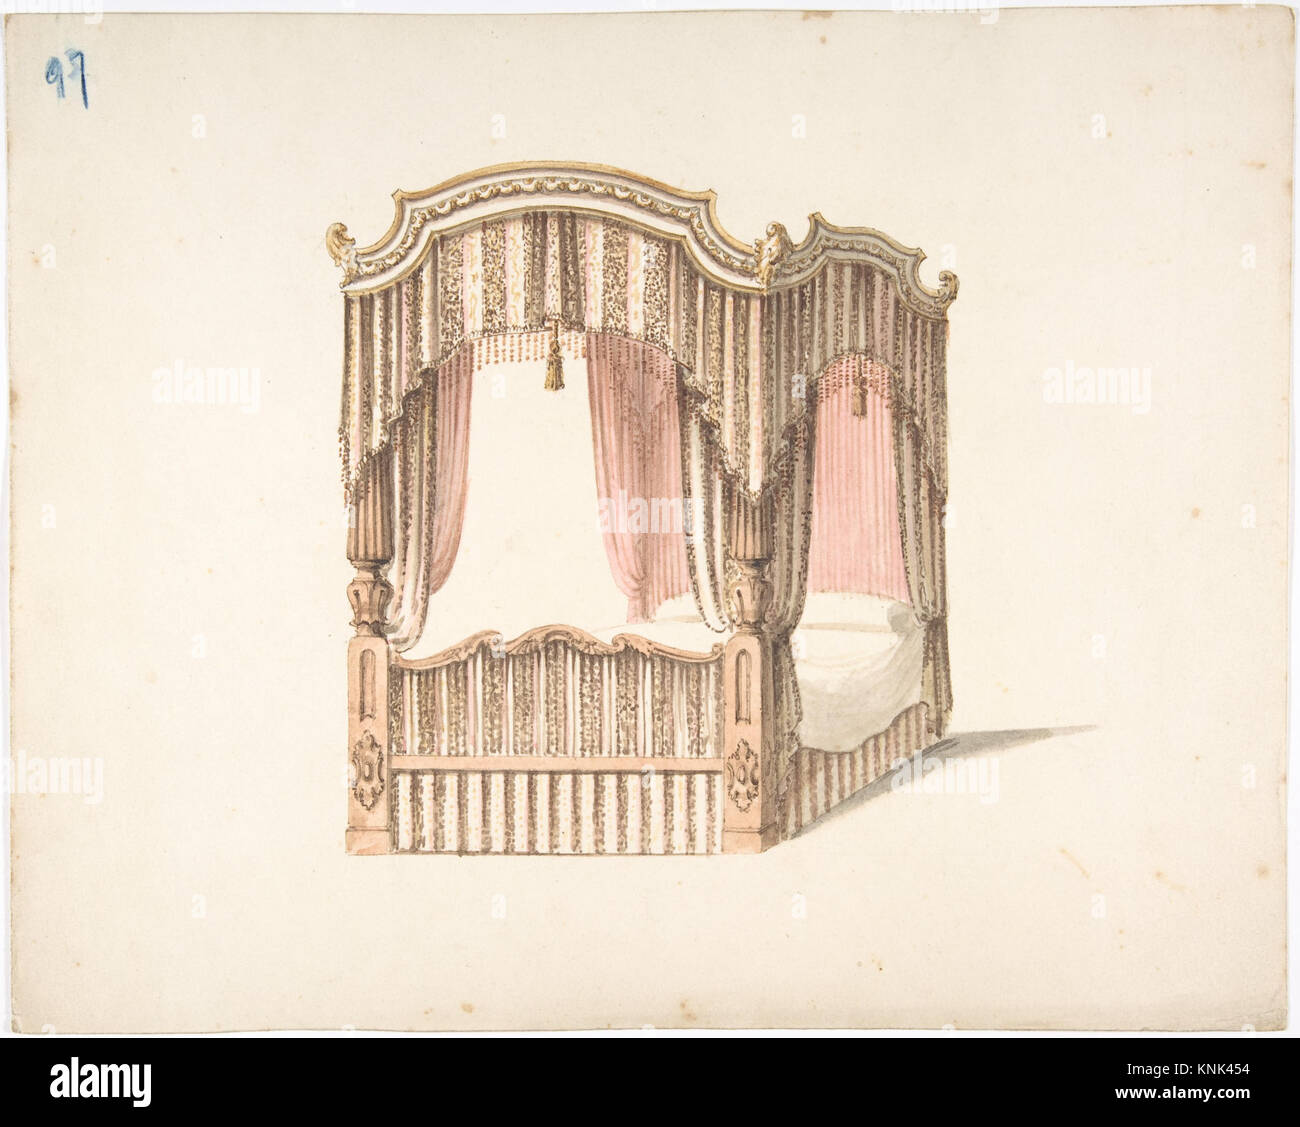 Design for a Curtained Four Poster Bed with Brown, Pink and White Striped Curtains Stock Photo